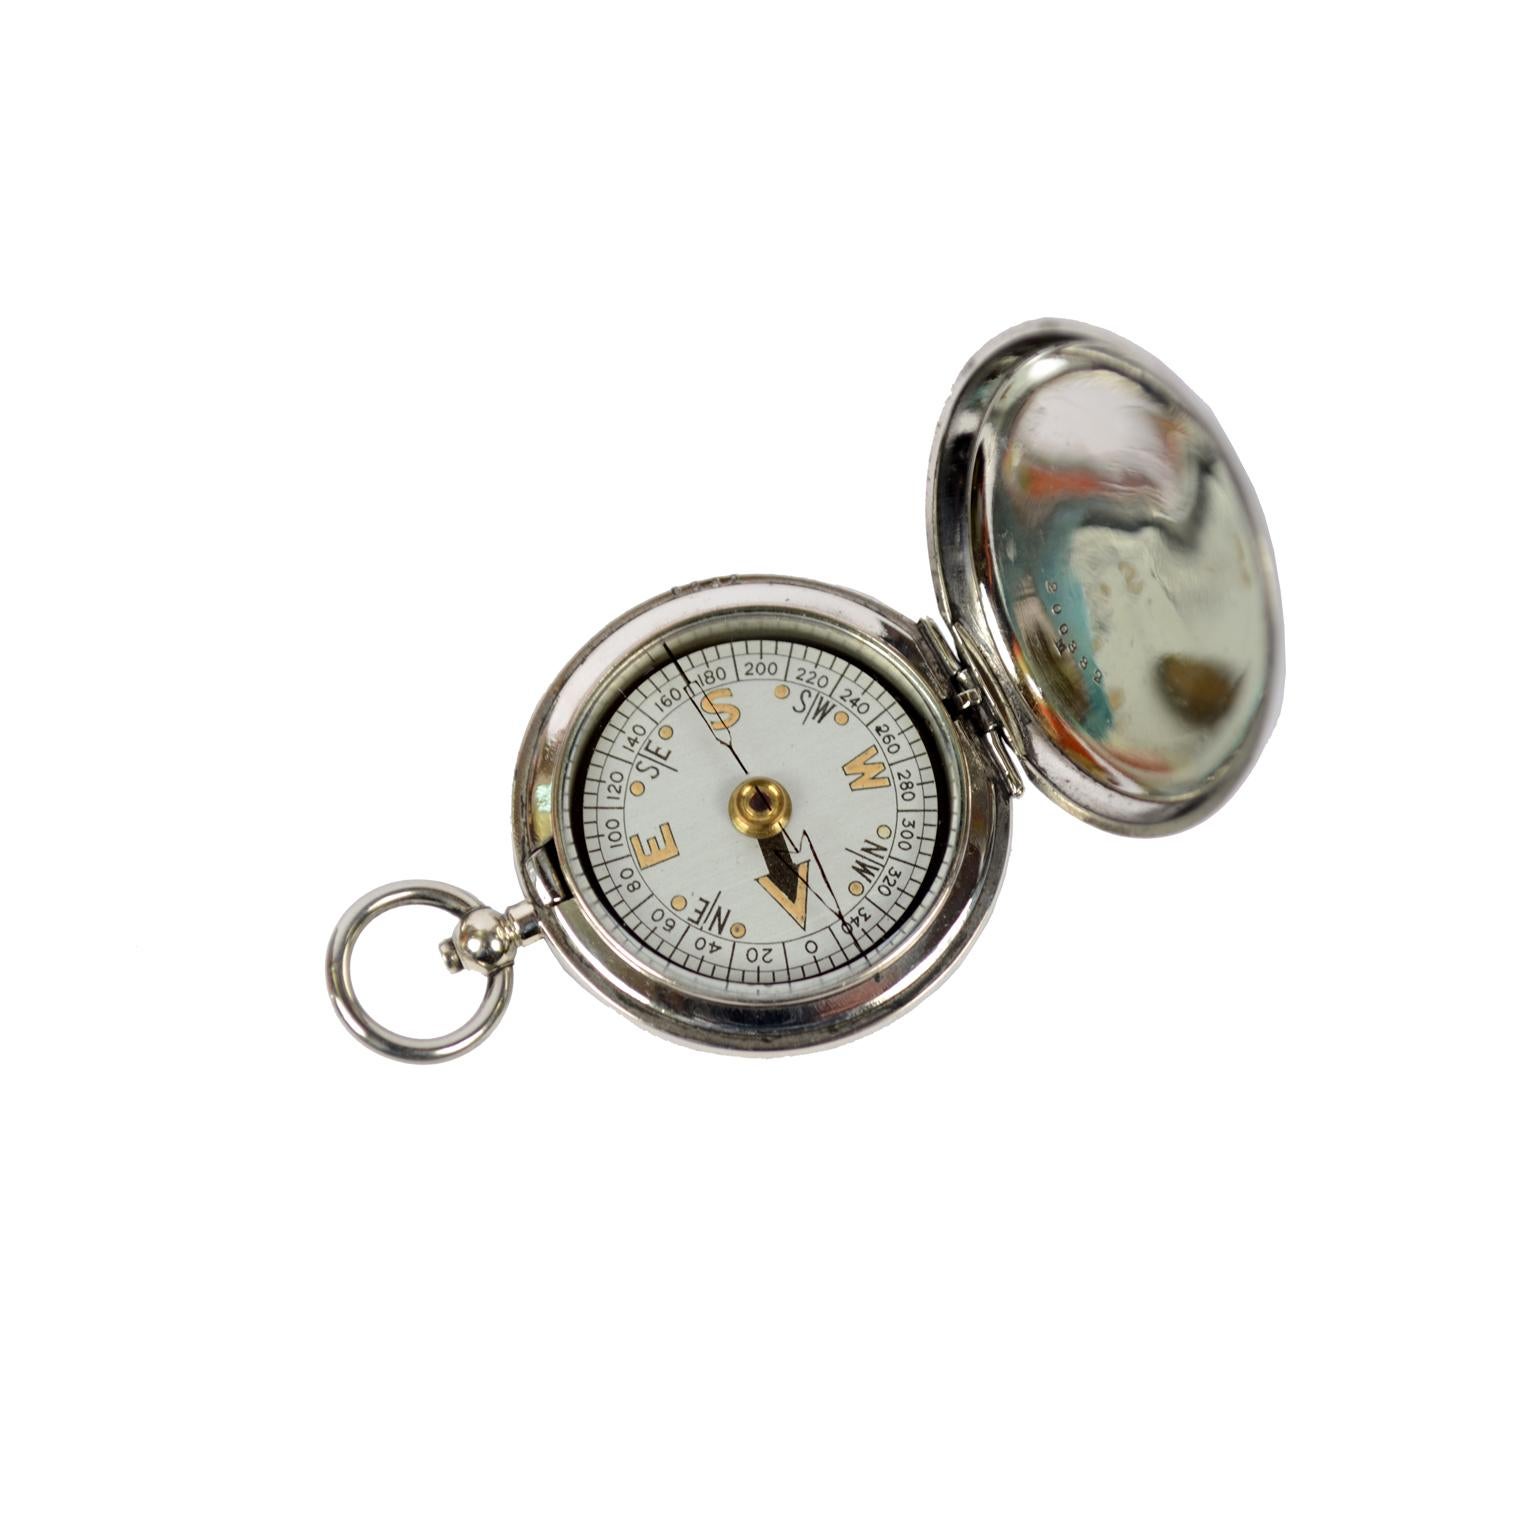 Pocket compass used by RAF officers, 1926, of chromed brass in the shape of a pocket watch, signed Short & Mason VI A130. The compass has a snap-on cover with release button inside the ring. Compass card with four winds complete with a goniometric